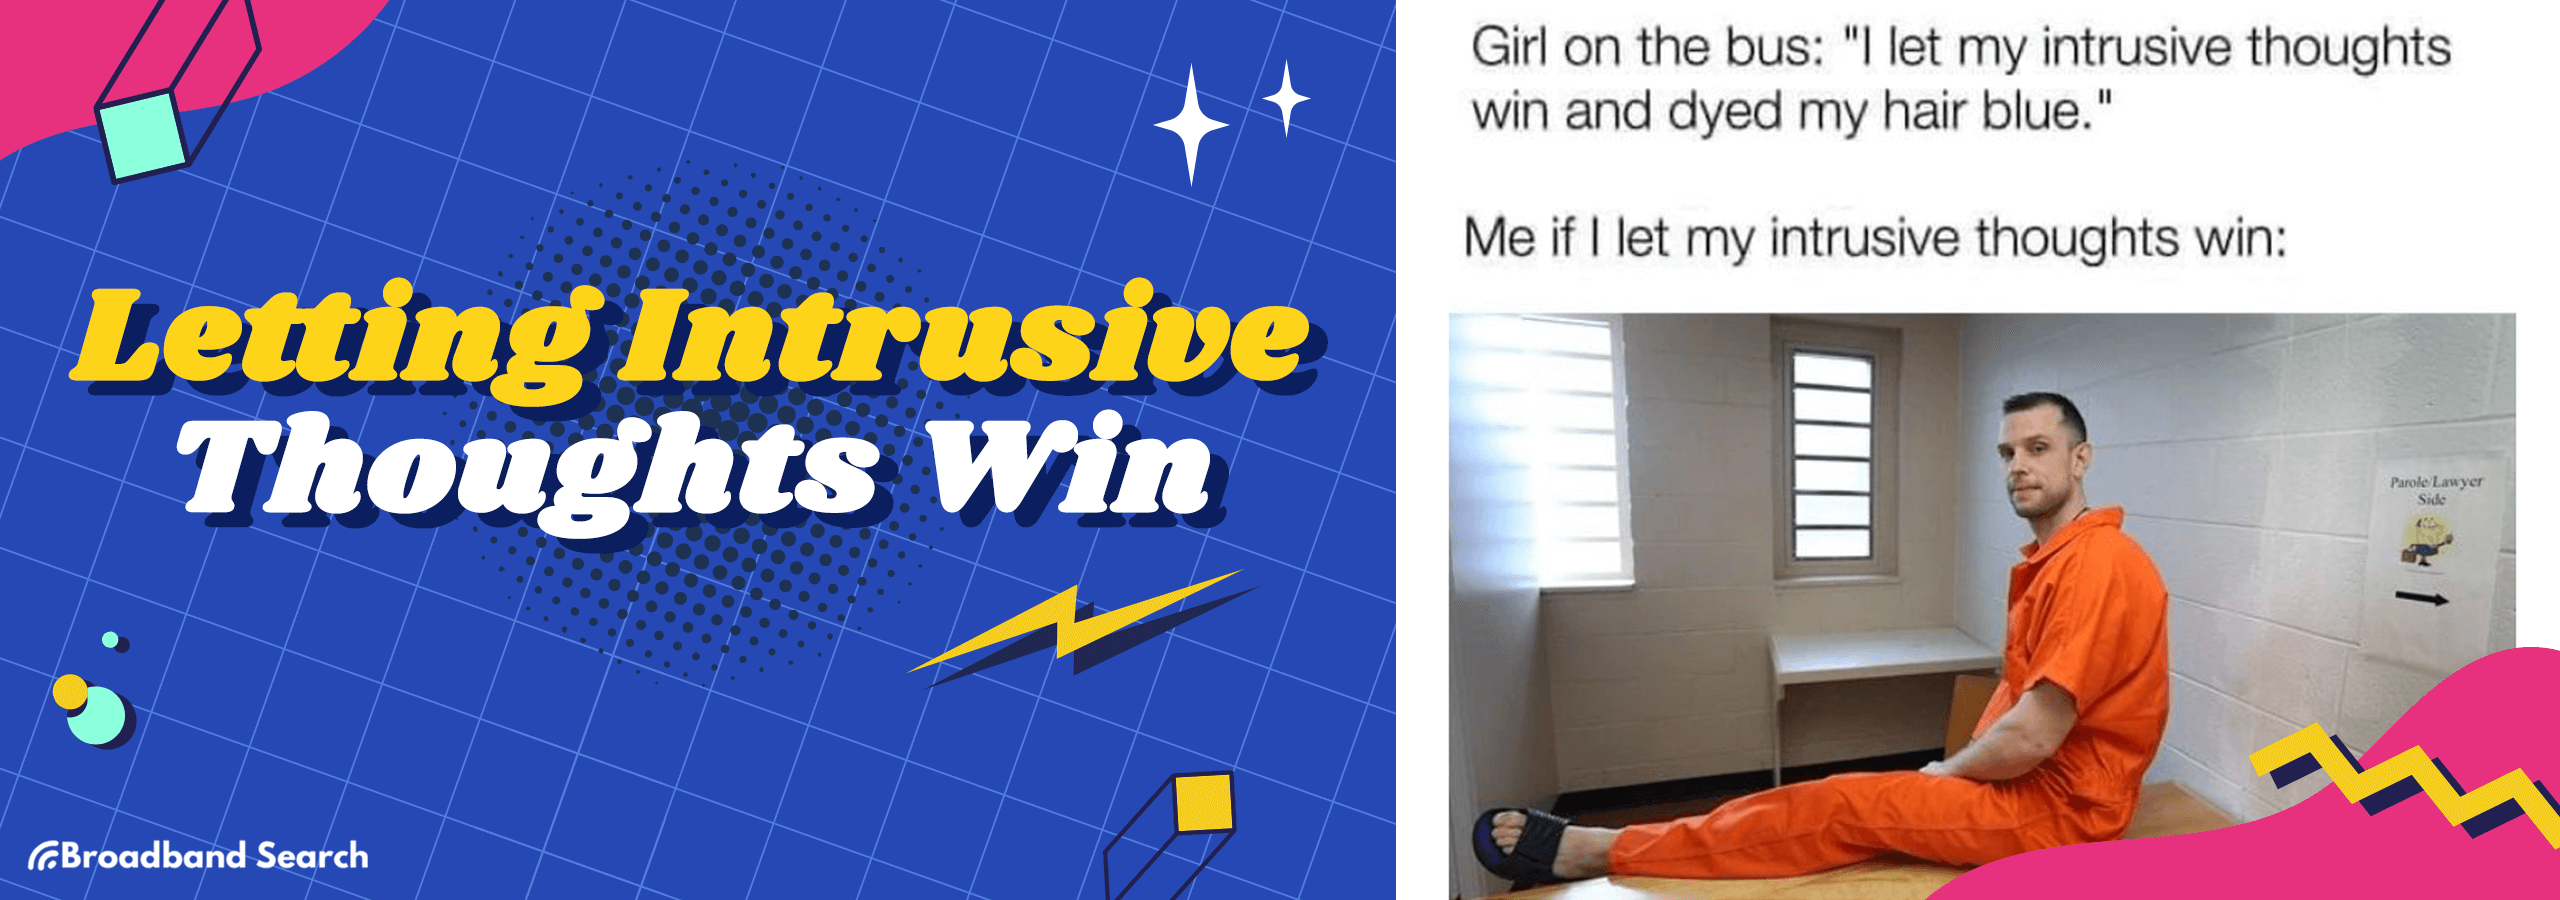 Letting Intrusive thoughts win meme